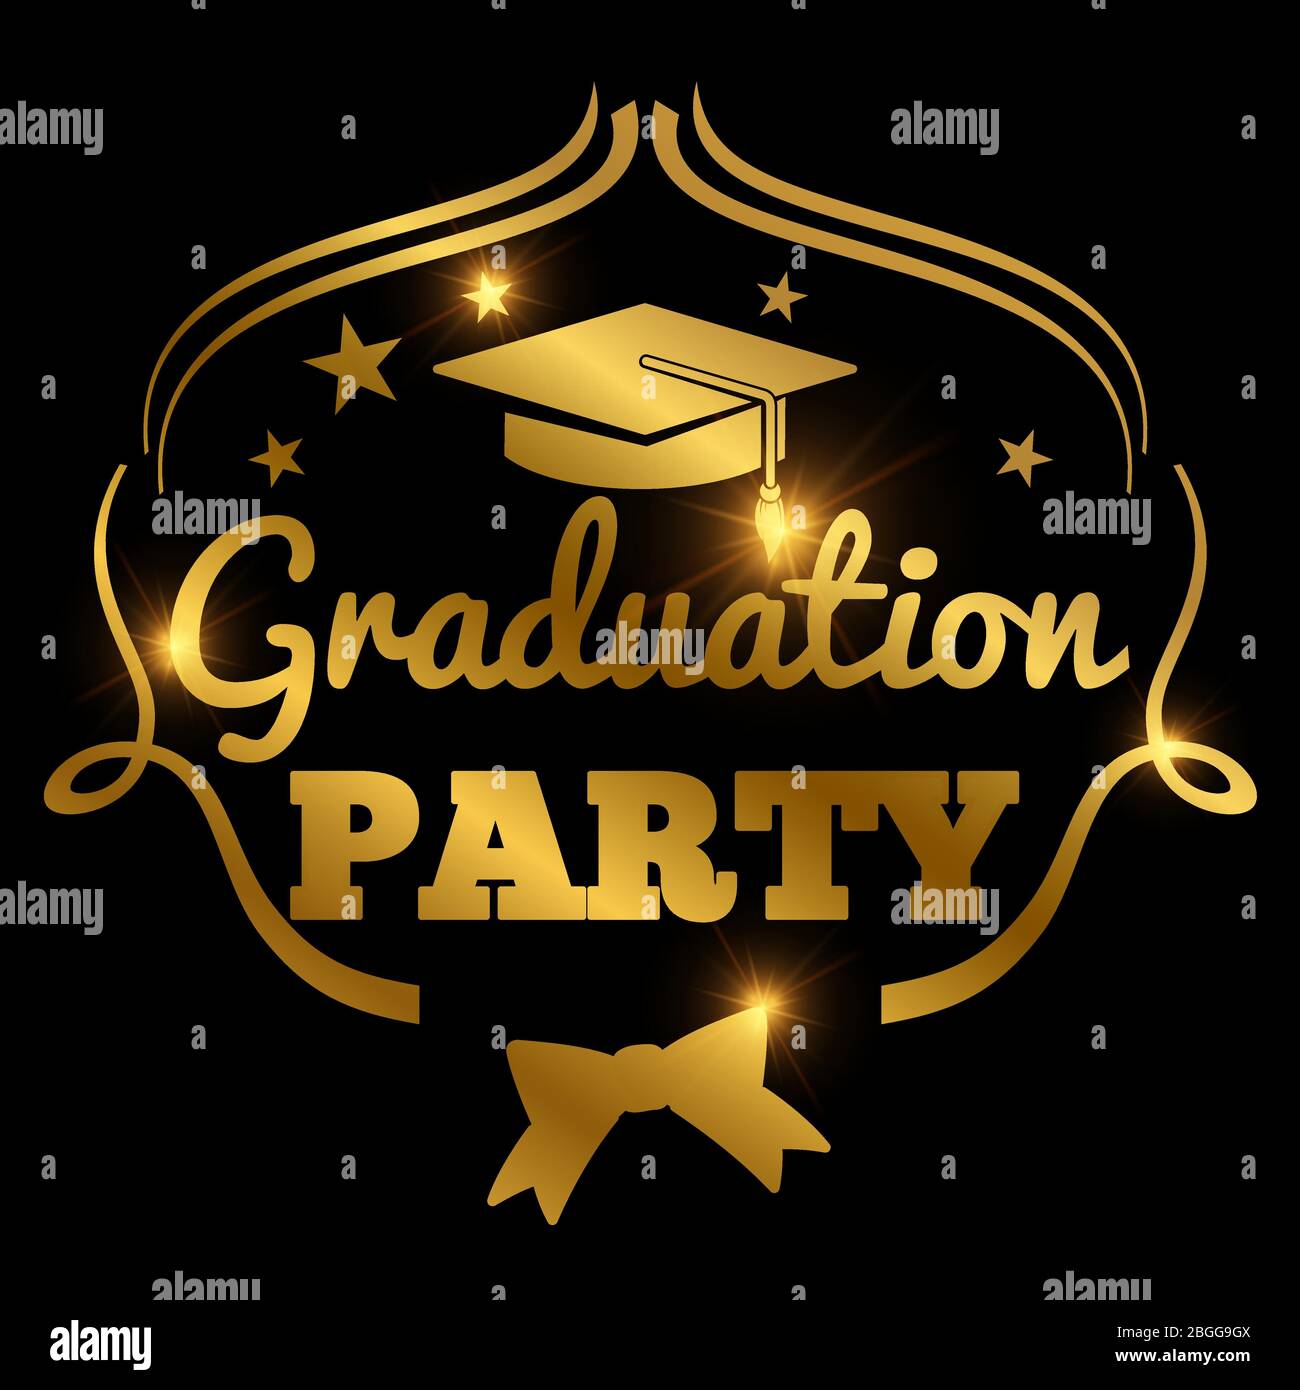 Shining golden graduation party banner background. Illustration of celebration and ceremony Stock Vector